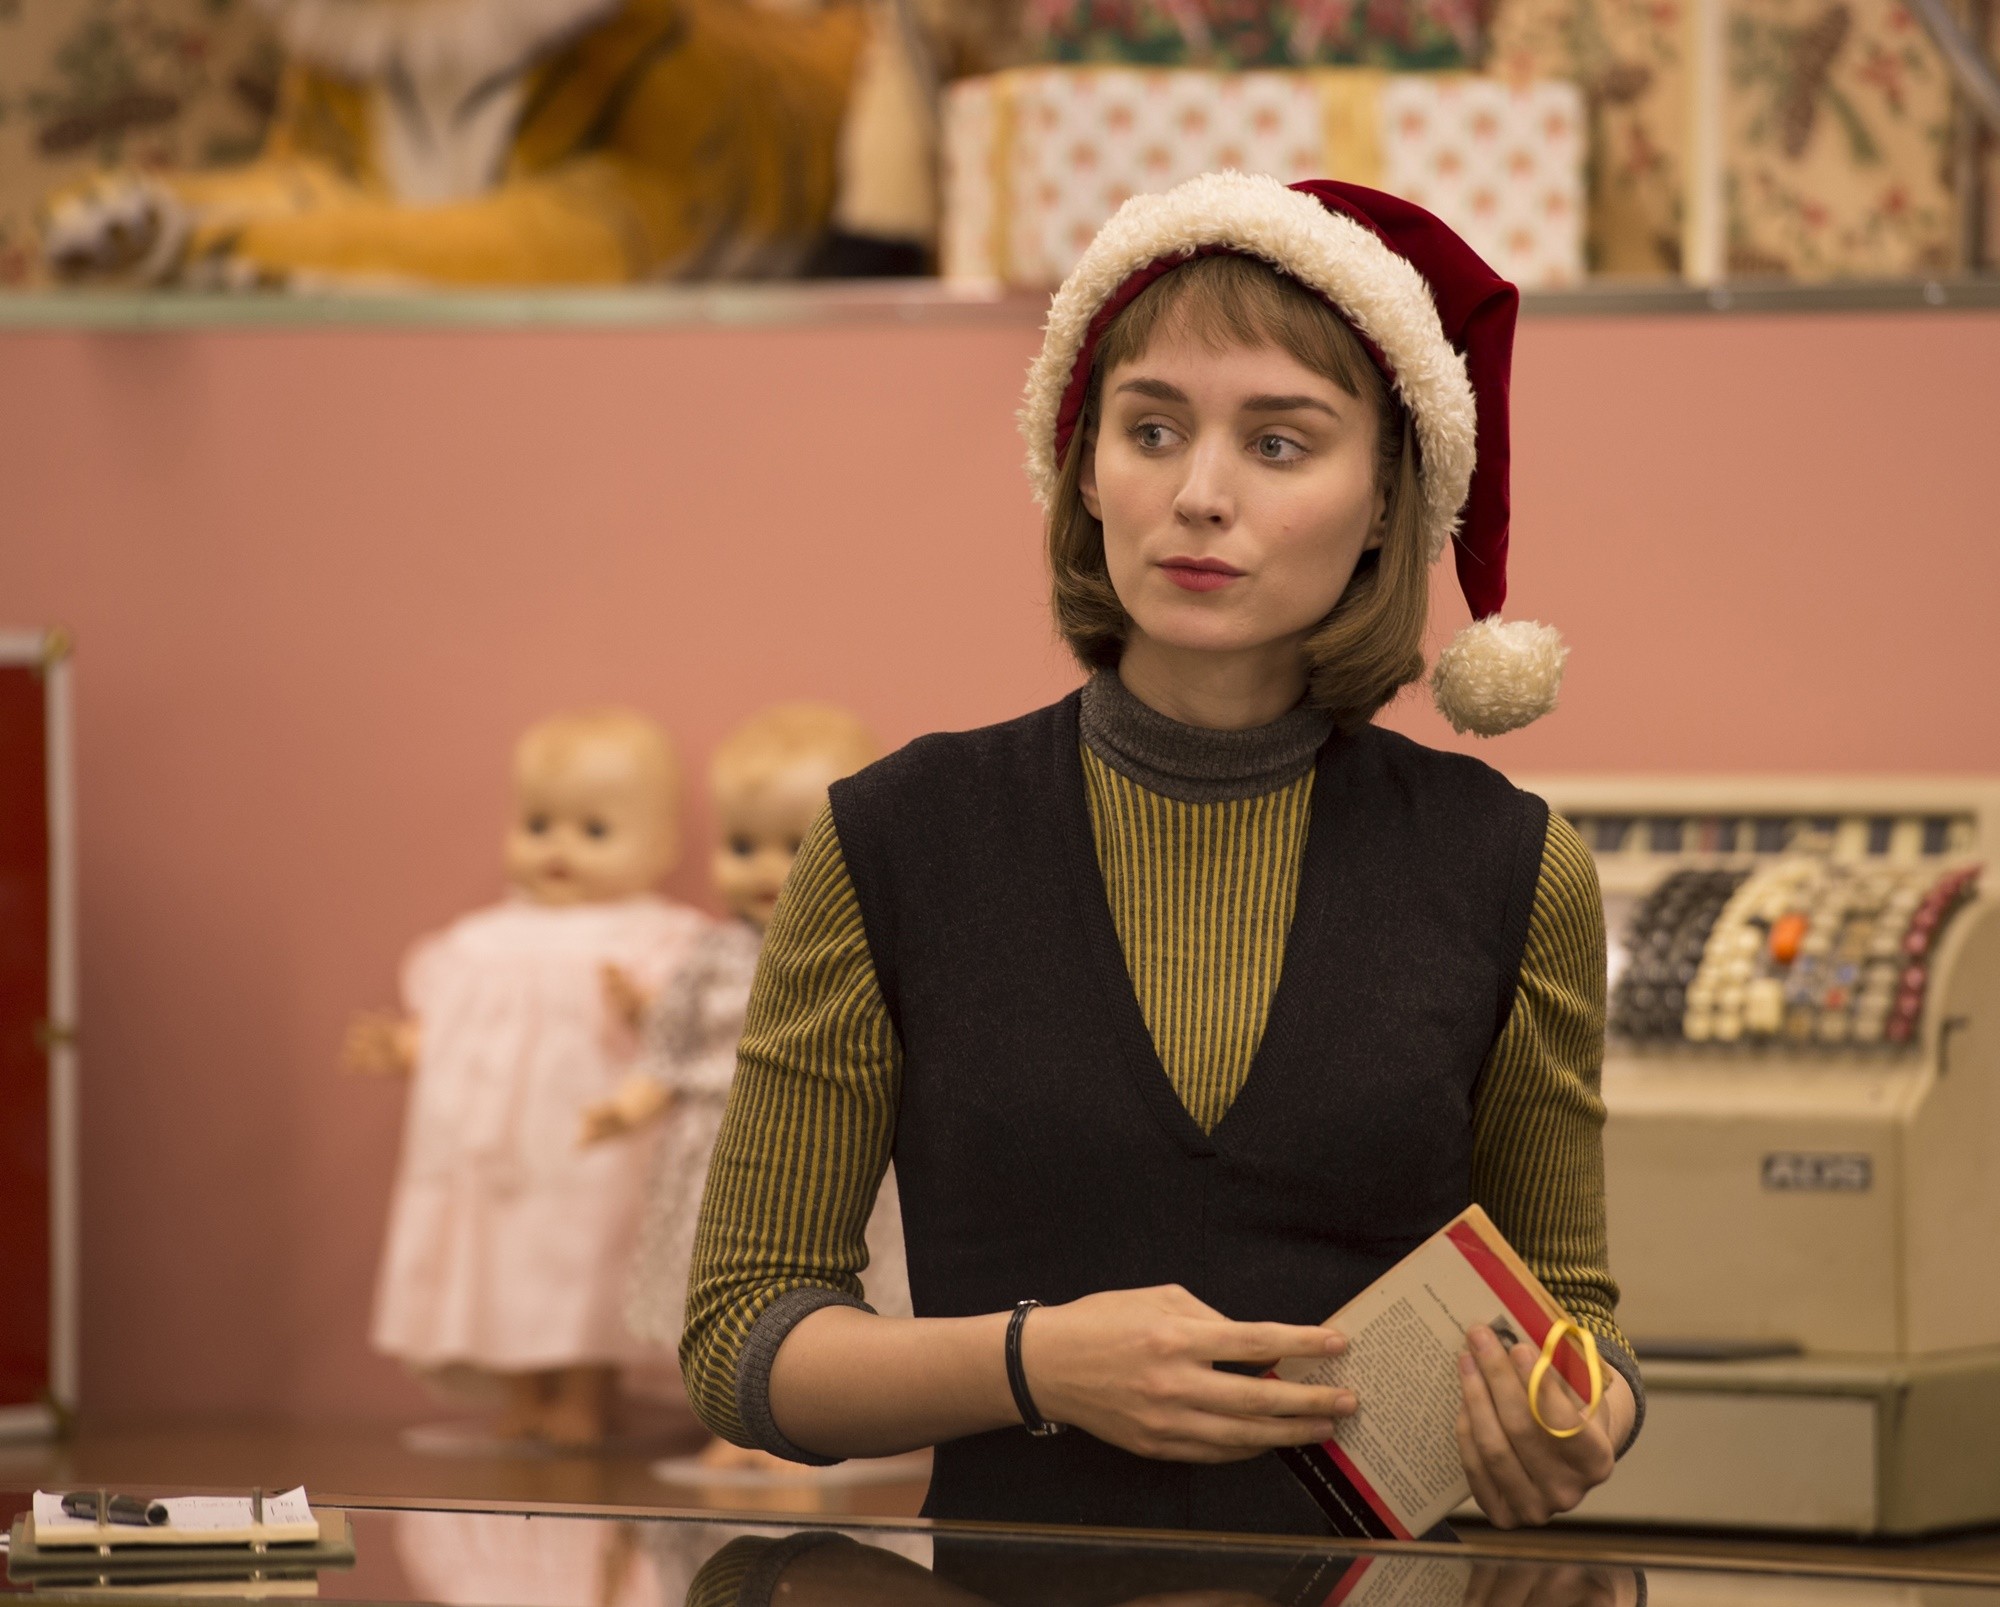 Rooney Mara stars as Therese Belivet in The Weinstein Company's Carol (2015)